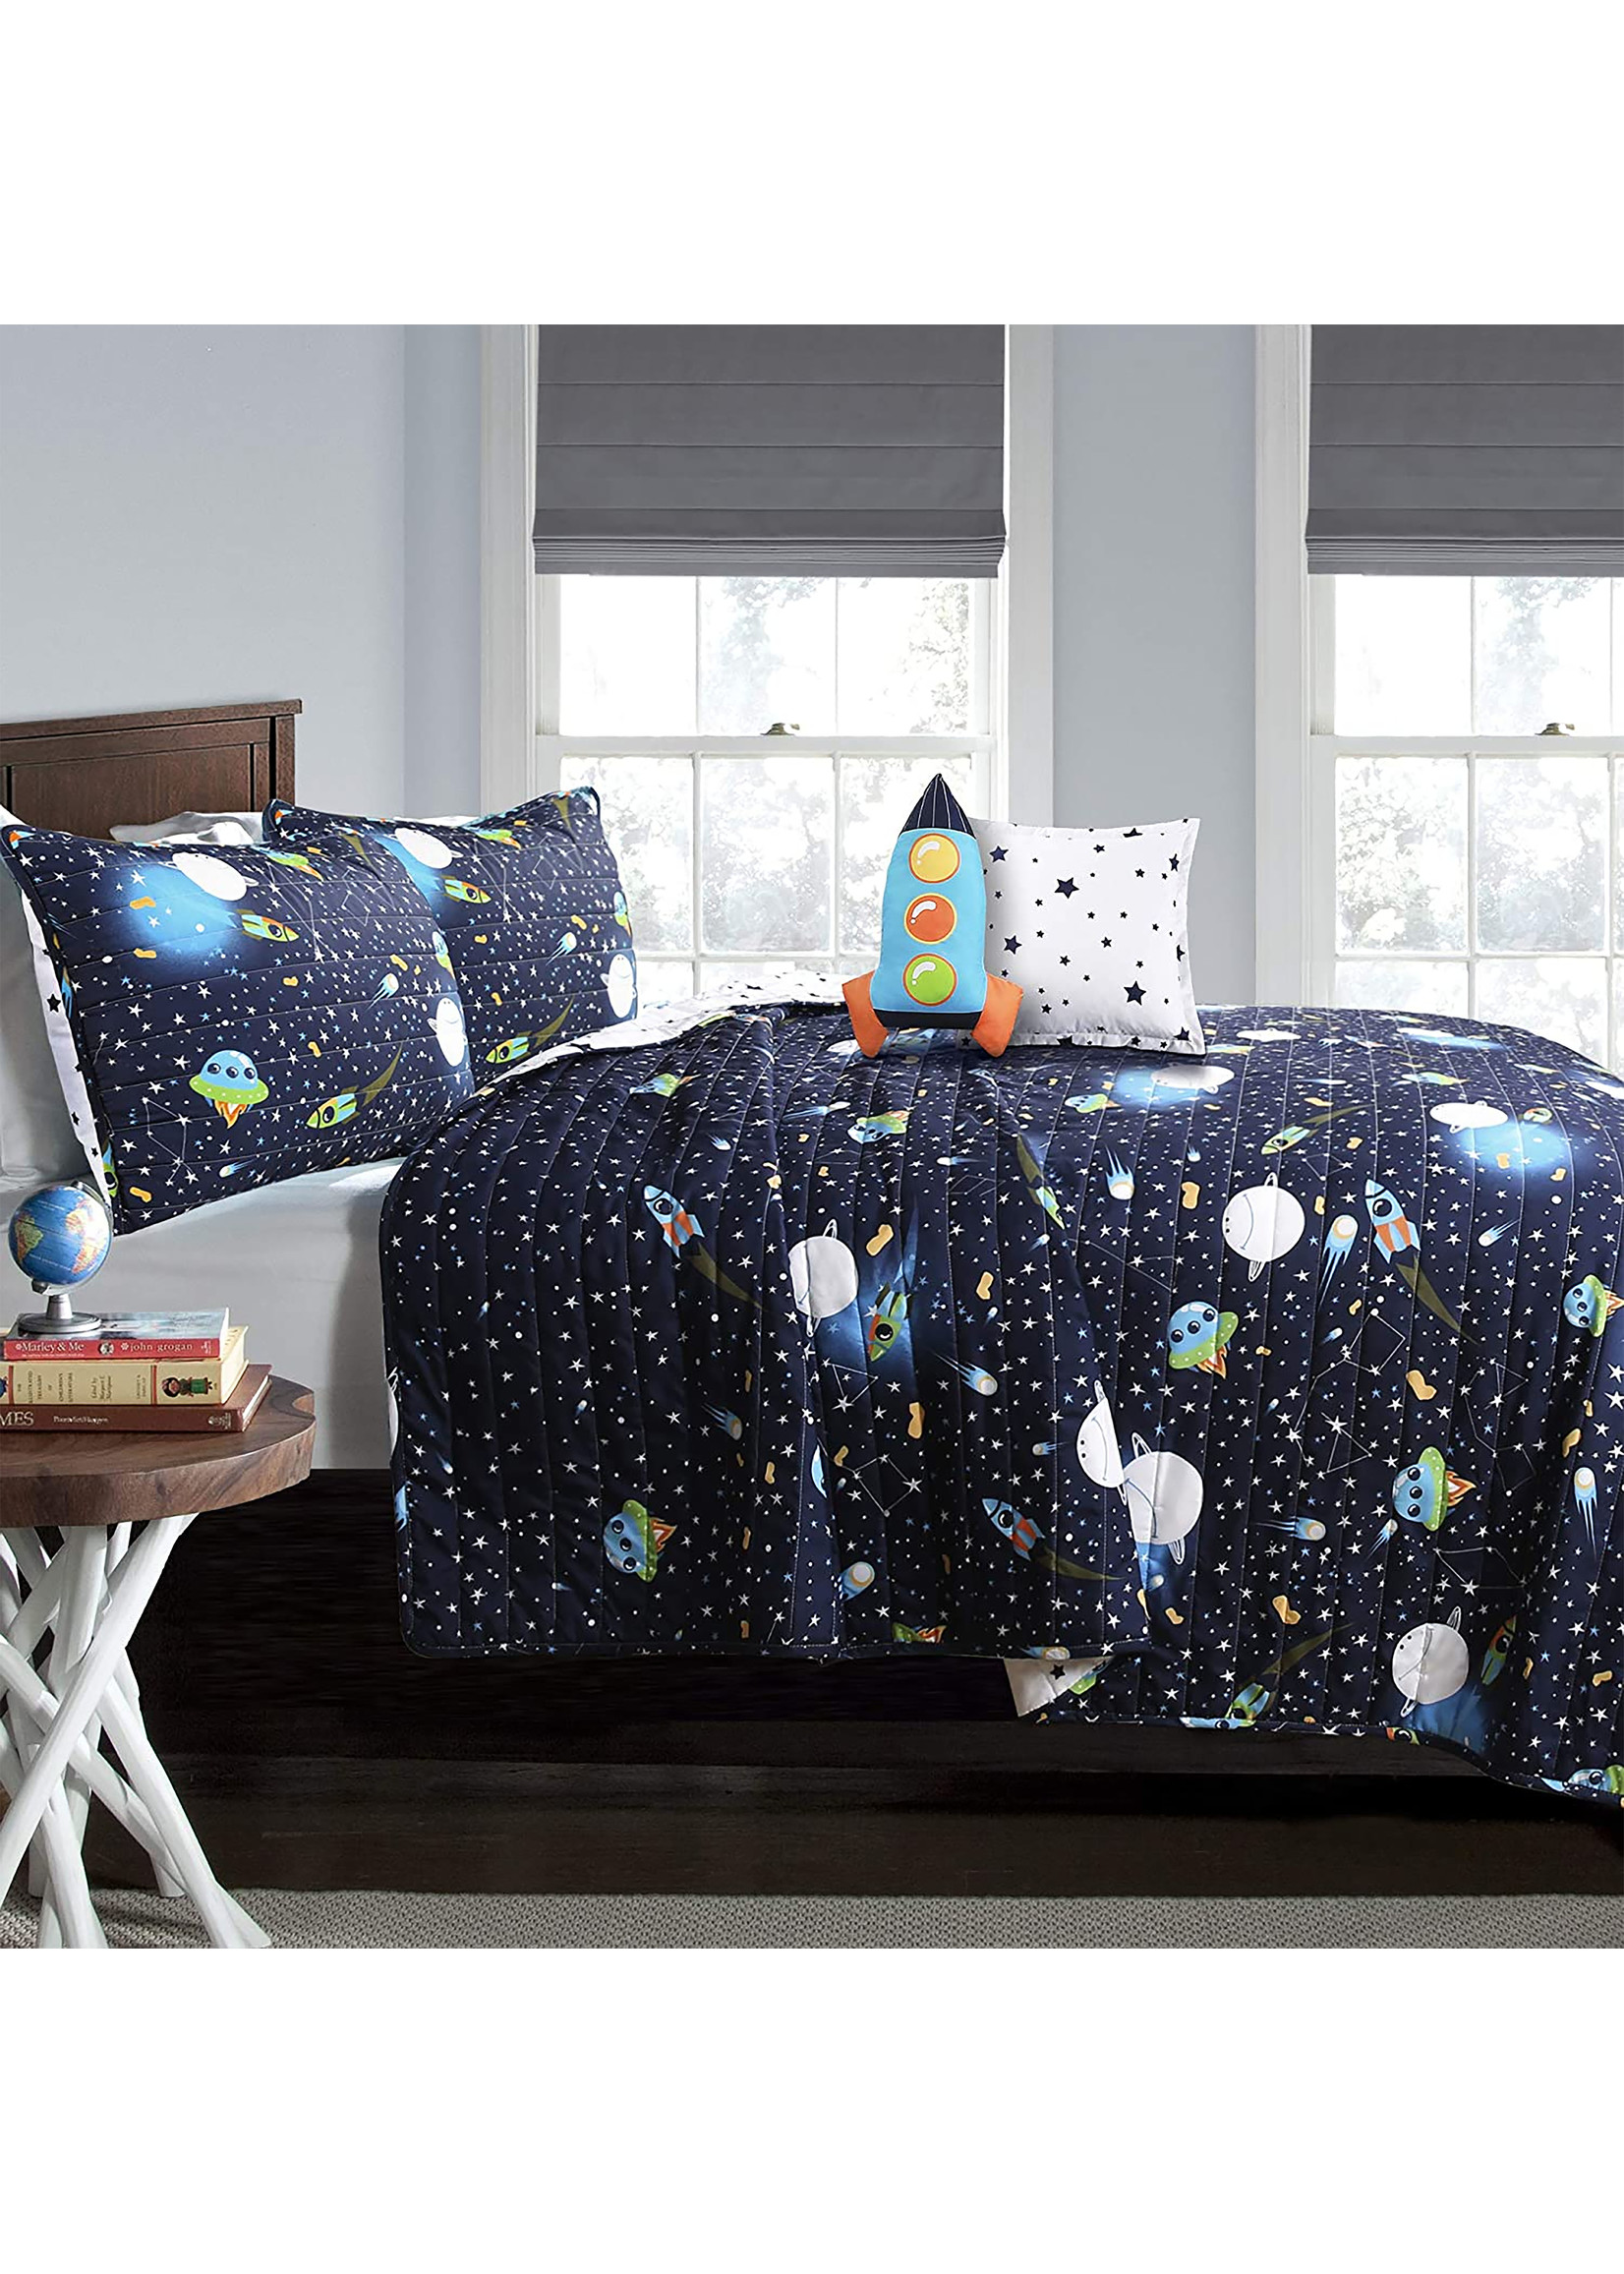 4PC REVERSIBLE QUILT WITH GALAXY MOTIF - COSMOS